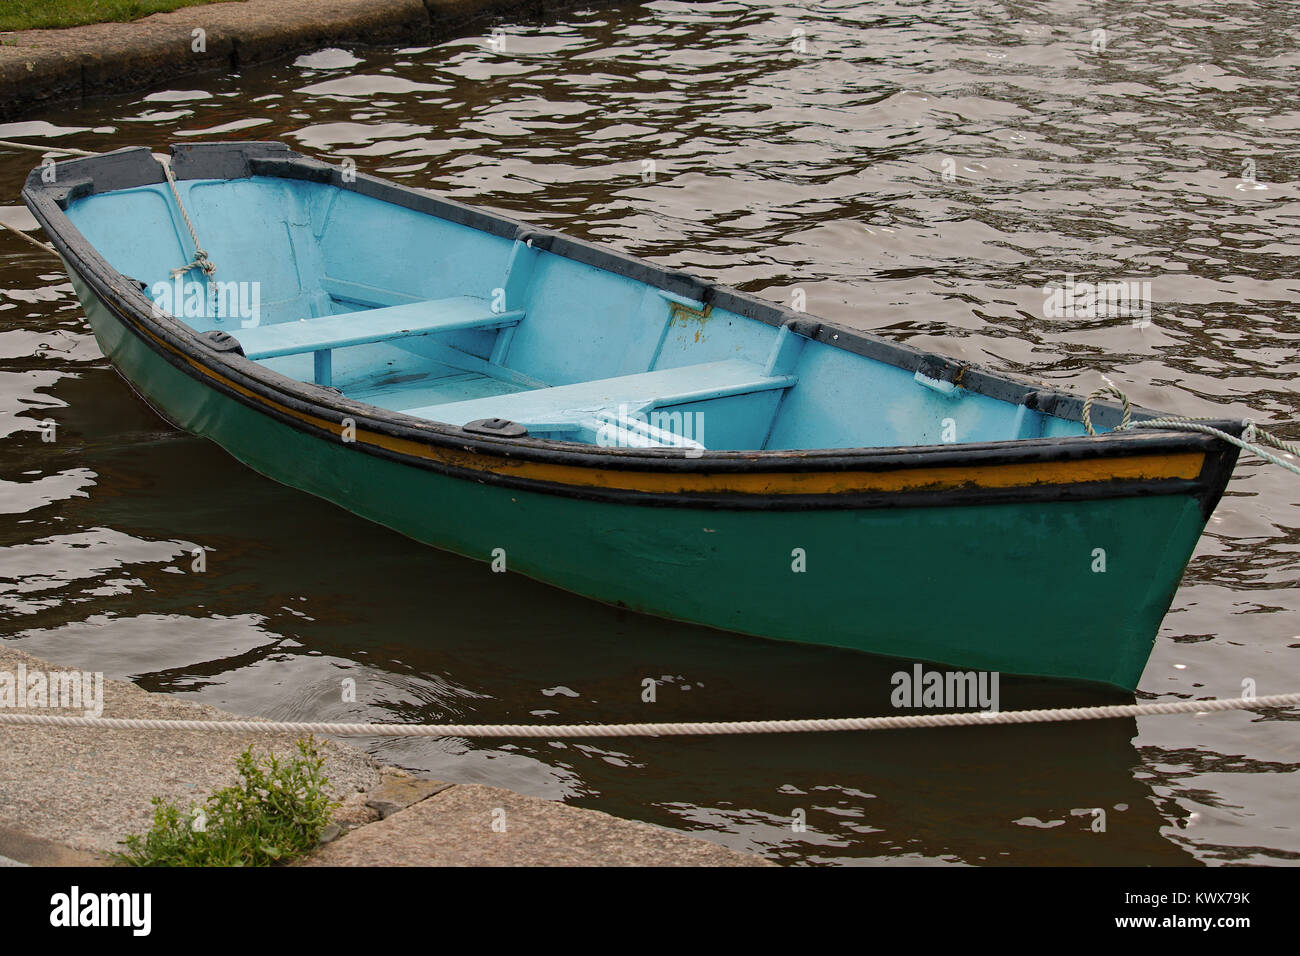 A green and blue rowing boat tied up on the side of a river. Stock Photo